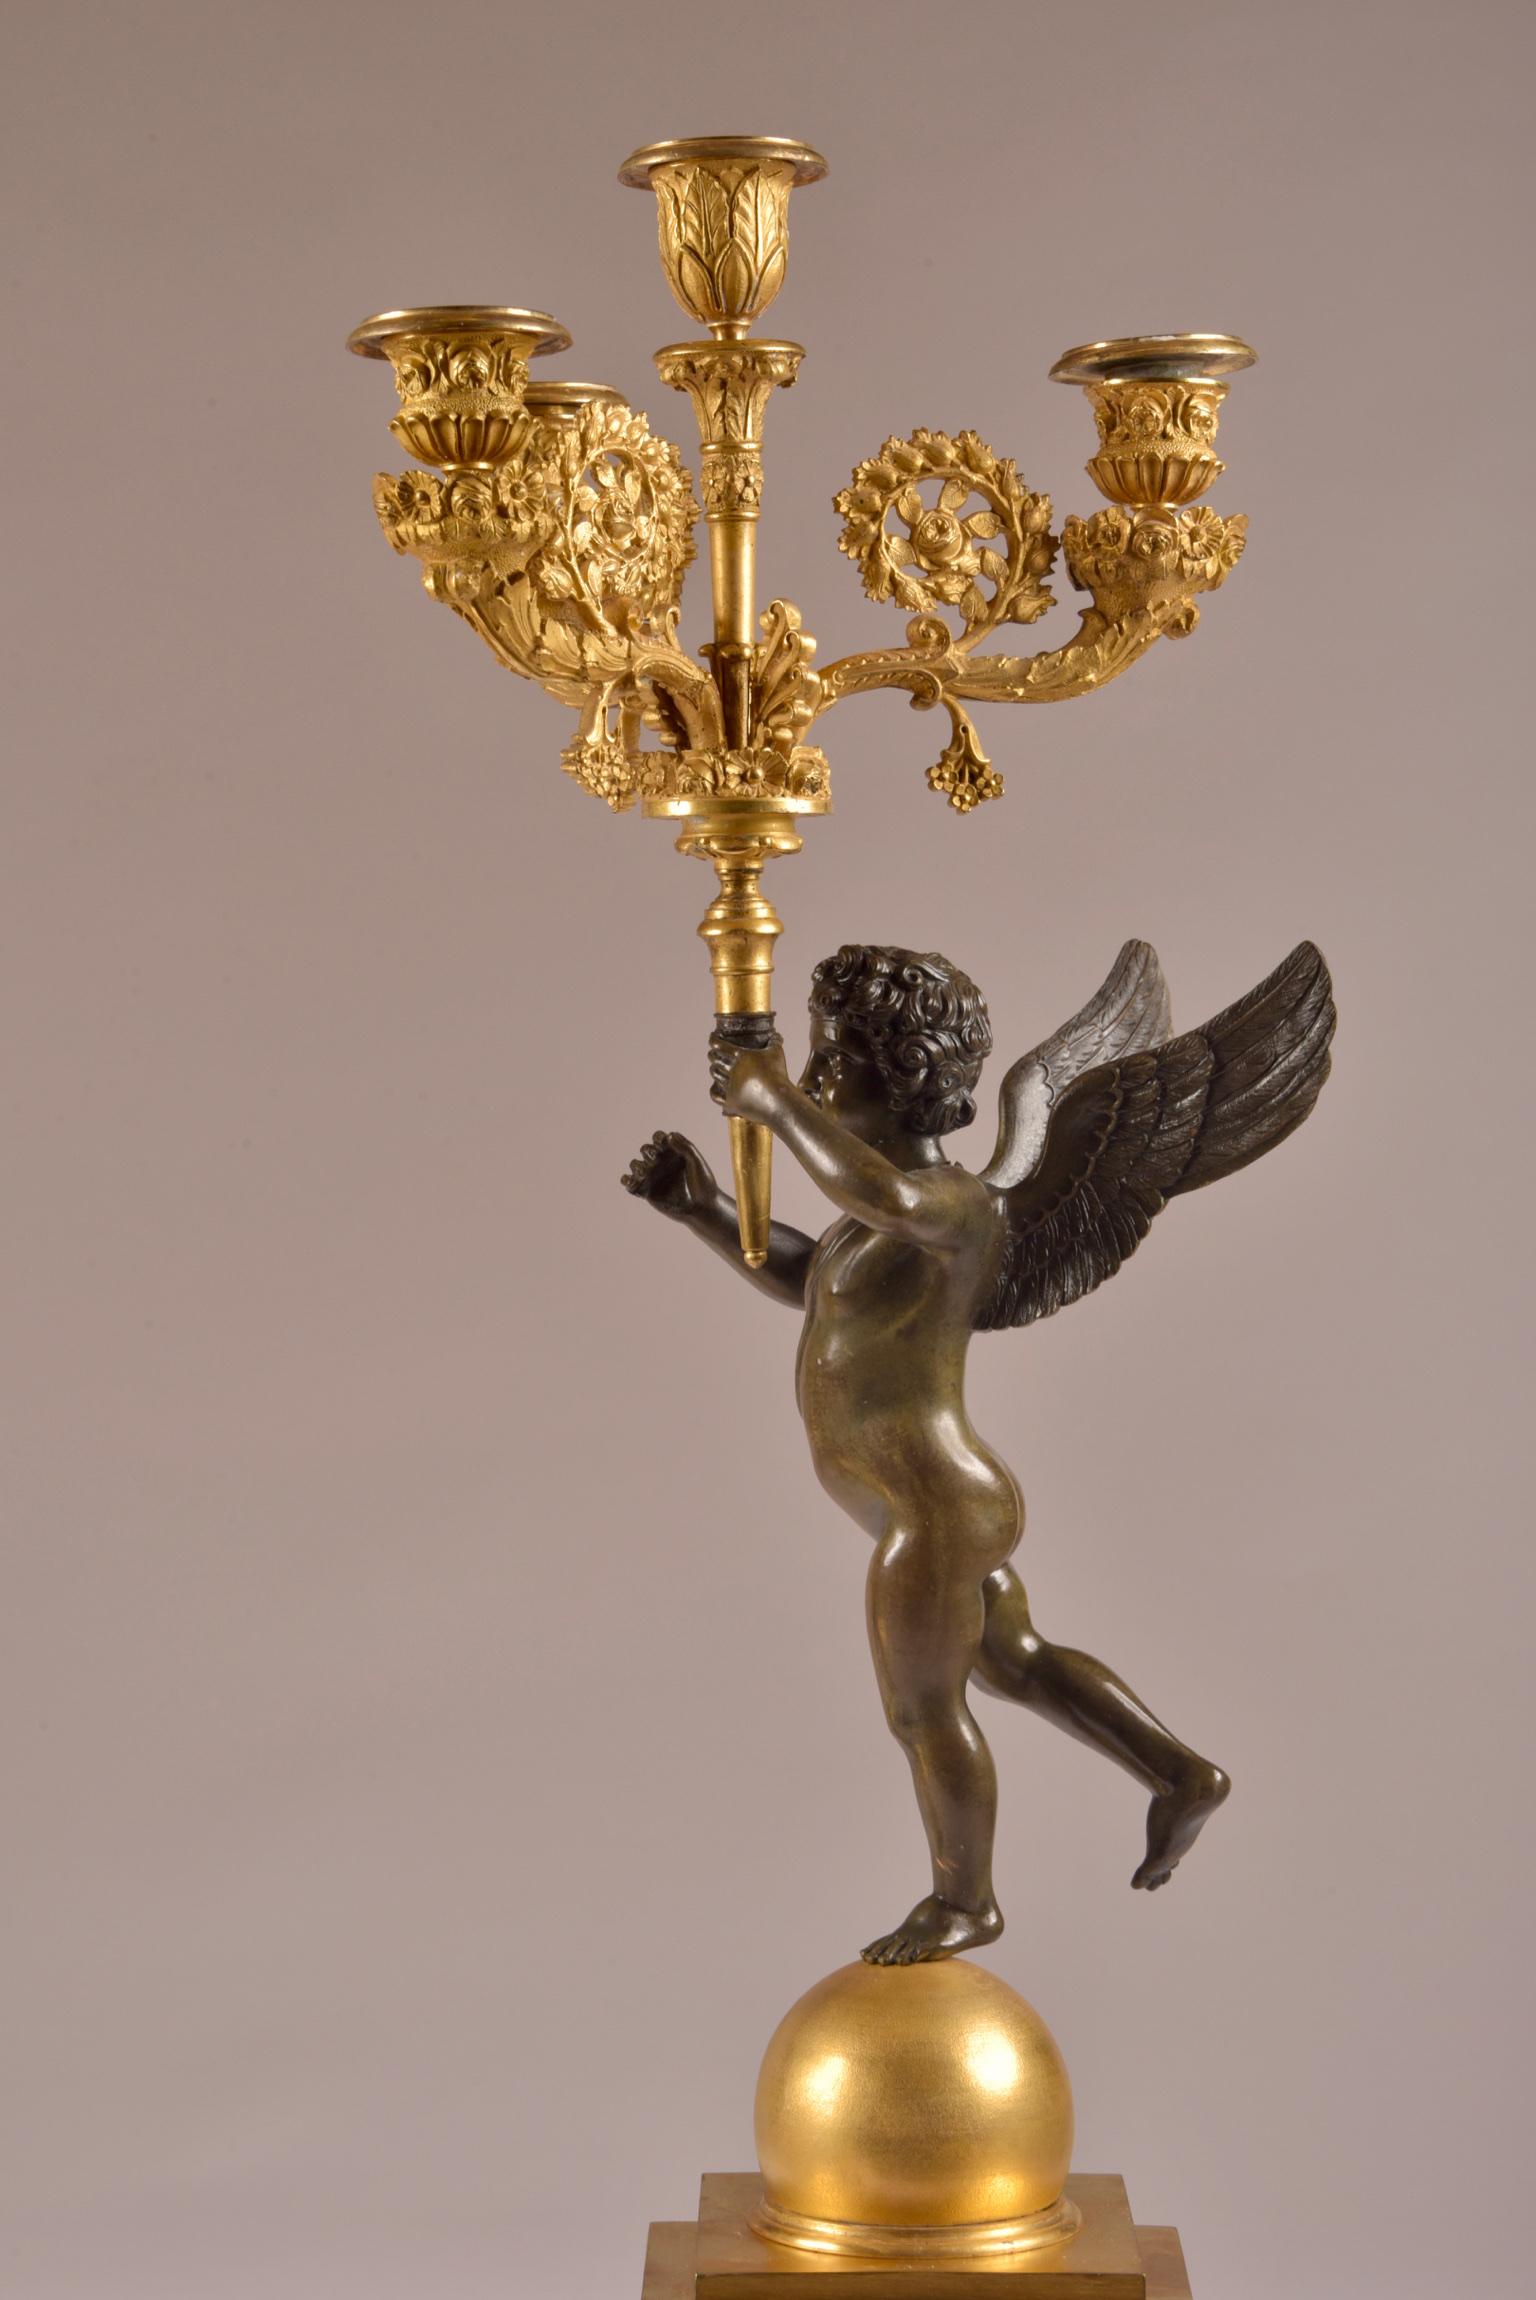 Pair of French Empire Candelabras with Putti, Superb Ormolu Candleholders, 1810  For Sale 2